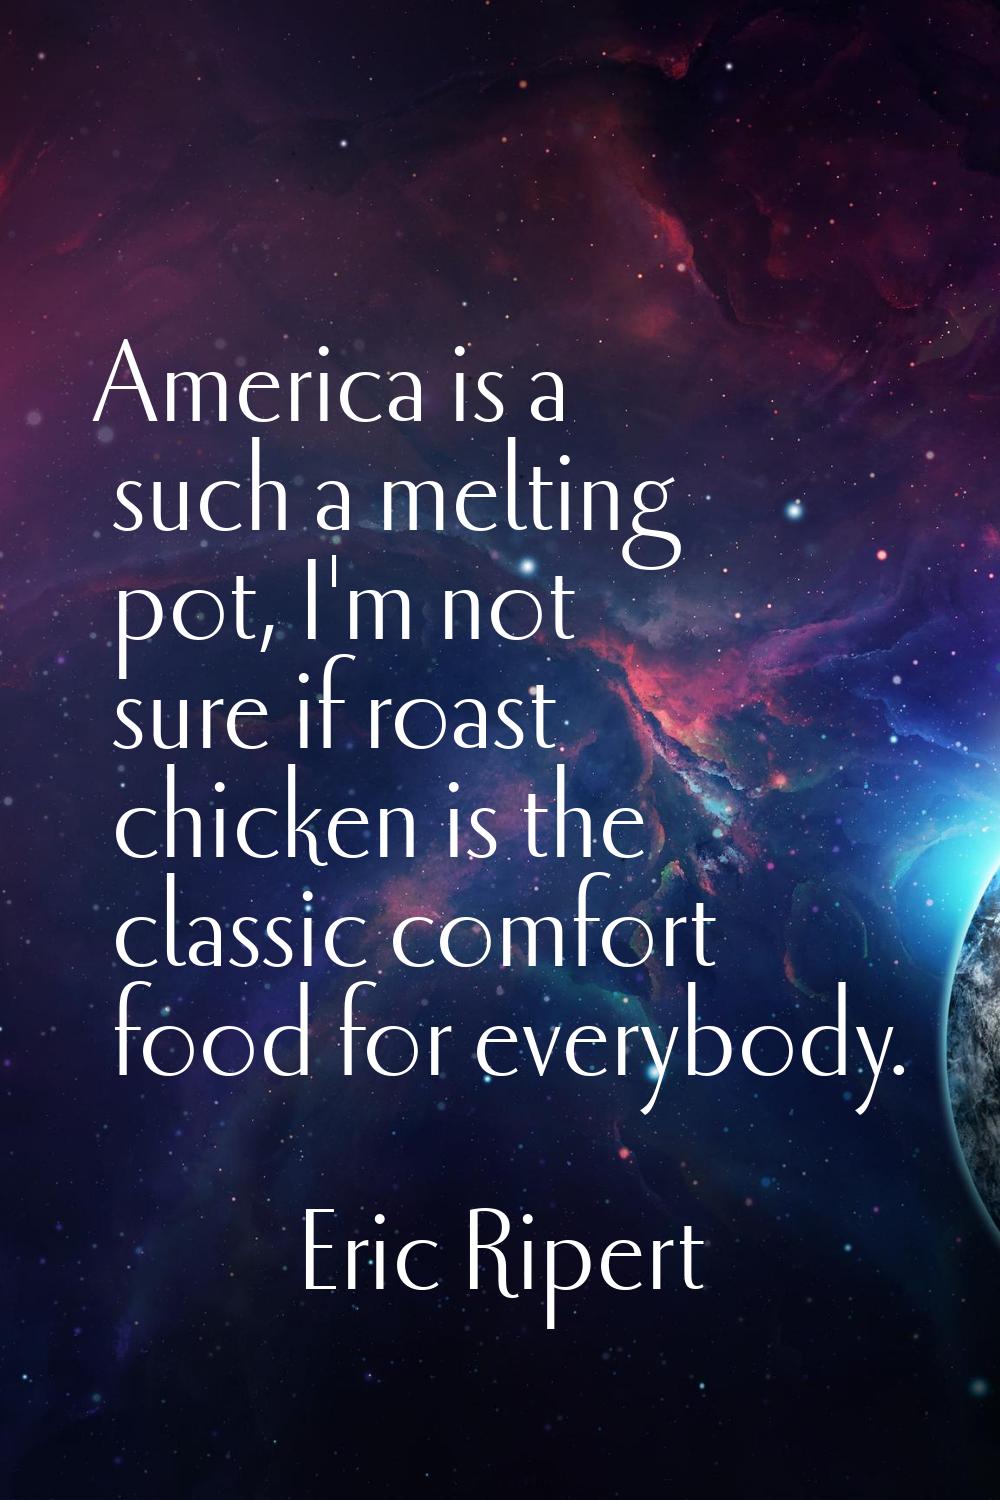 America is a such a melting pot, I'm not sure if roast chicken is the classic comfort food for ever